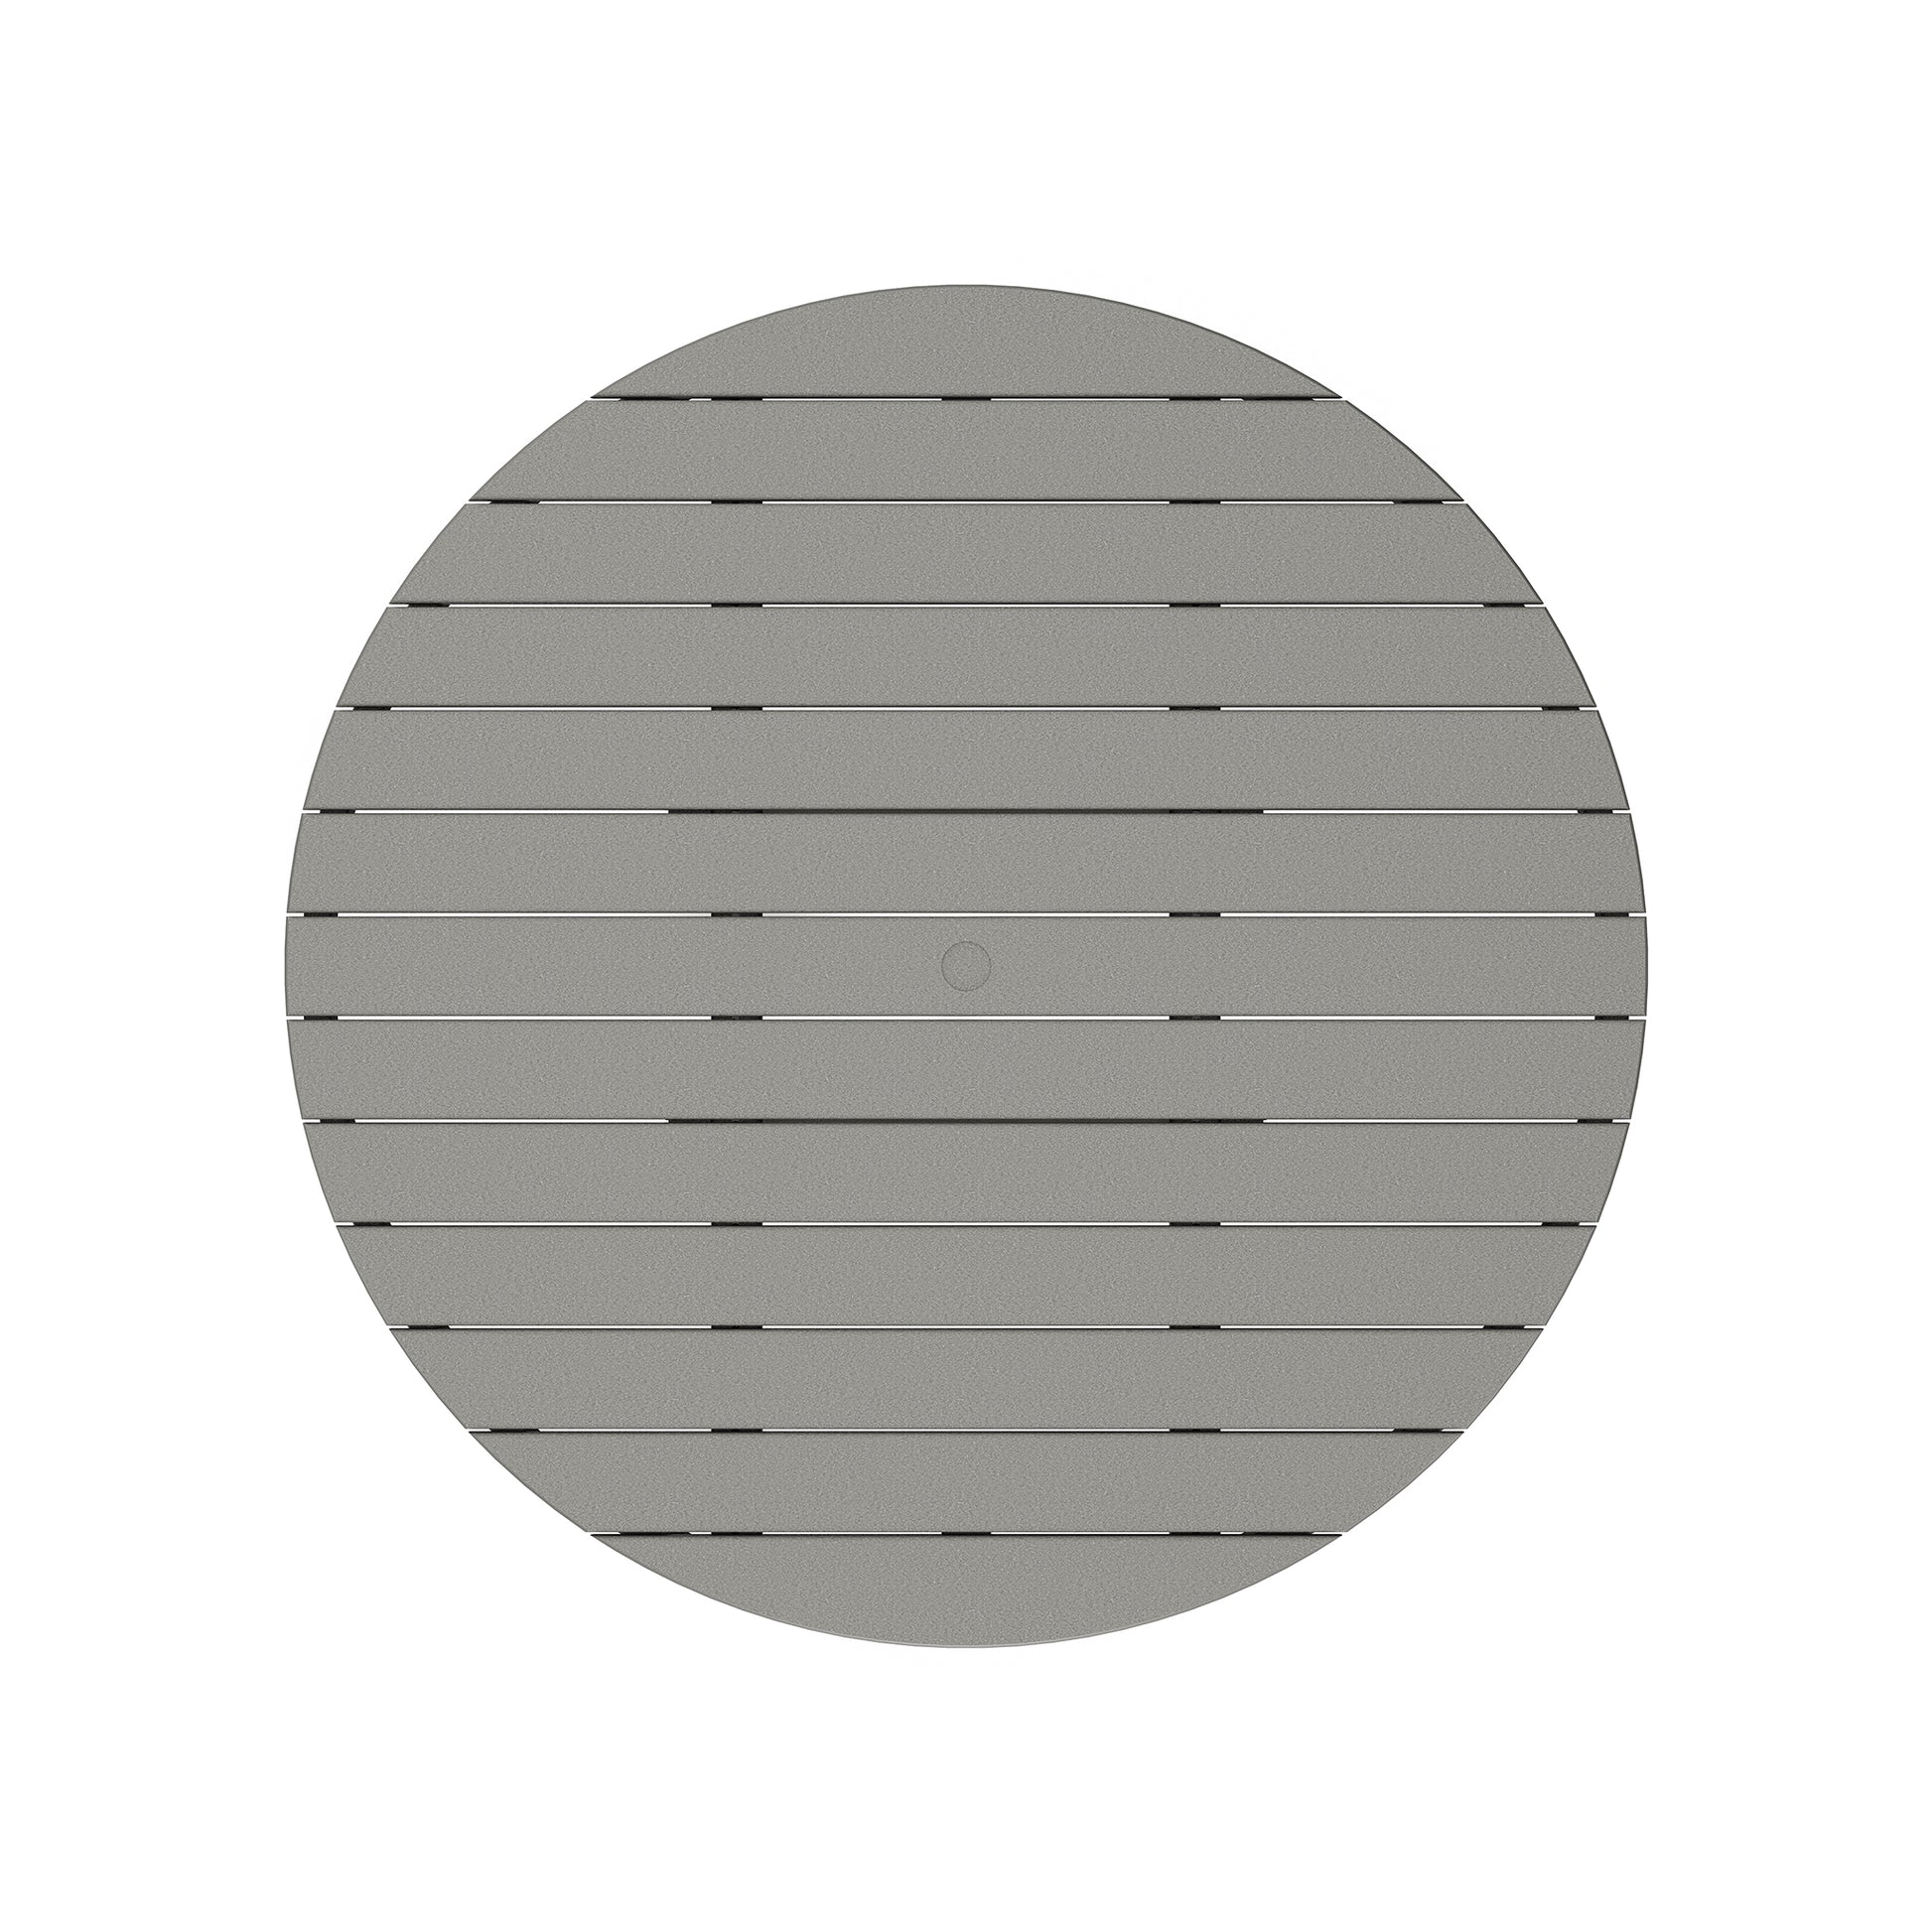 Circular grey structure with an array of horizontal slats, featuring a central circular indentation. The design is minimalistic and symmetrical, perfect as a POLYWOOD Outdoor 48" Round Dining Table.